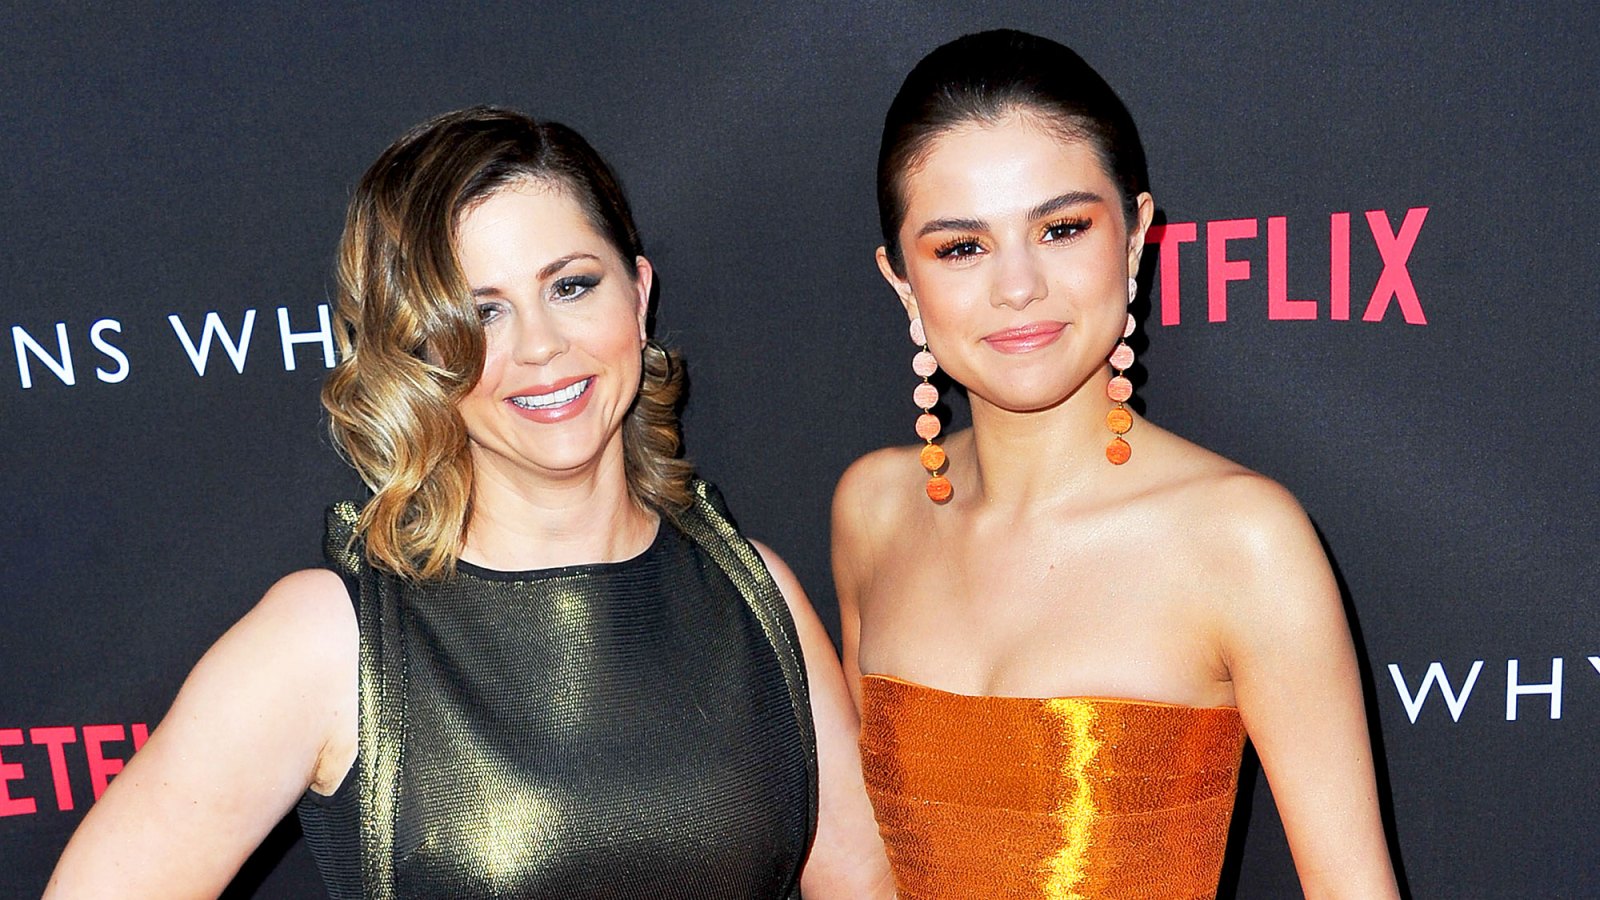 Mandy Teefey and Selena Gomez attend the Premiere of Netflix's "13 Reasons Why" at Paramount Pictures on March 30, 2017 in Los Angeles, California.